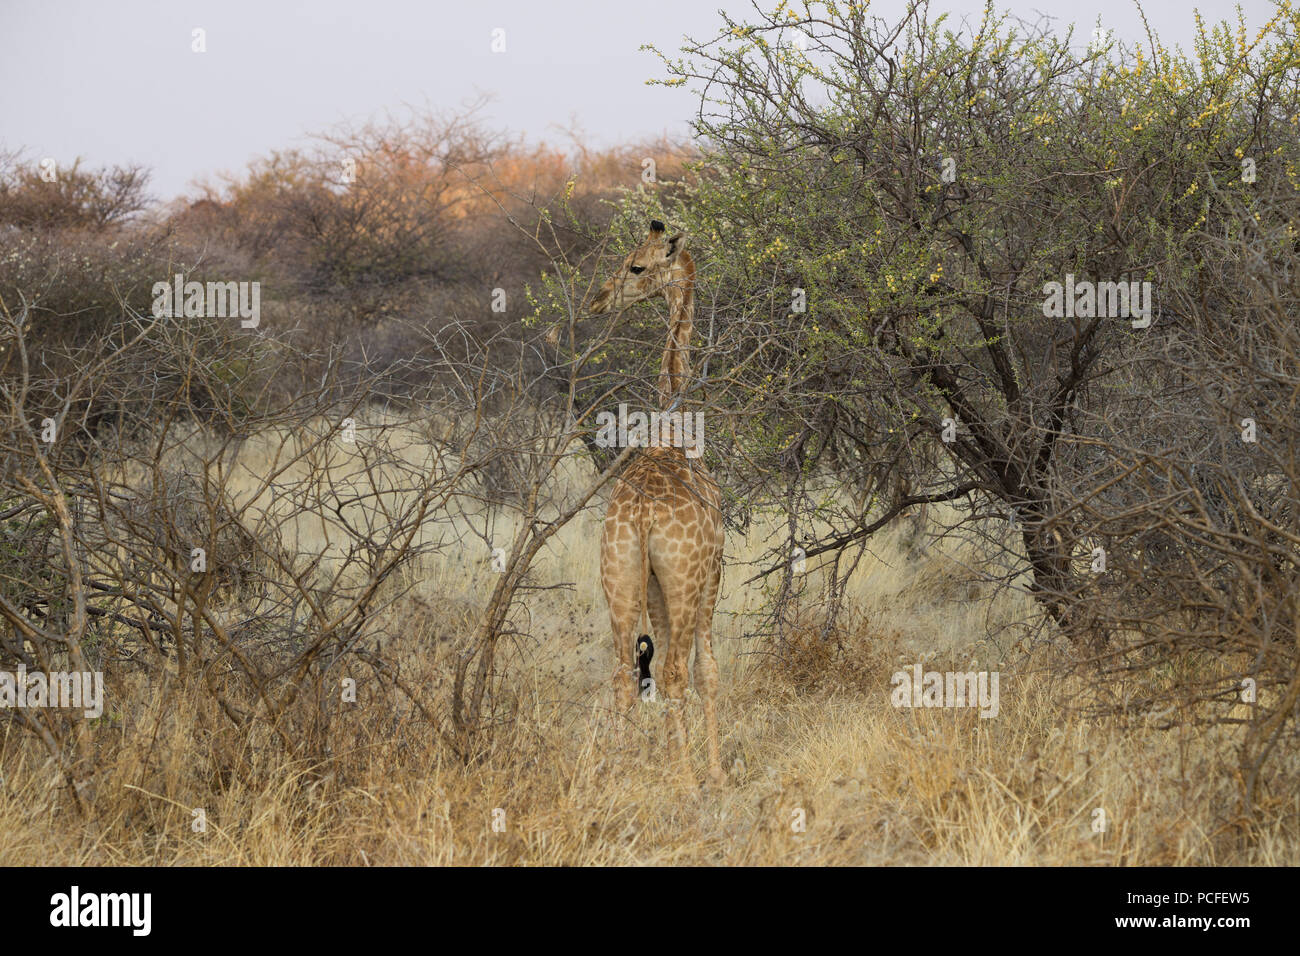 a small juvenile Giraffe (Giraffa camelopardalis) standing against a tree in the African savannah in Erindi game reserve, Namibia Stock Photo